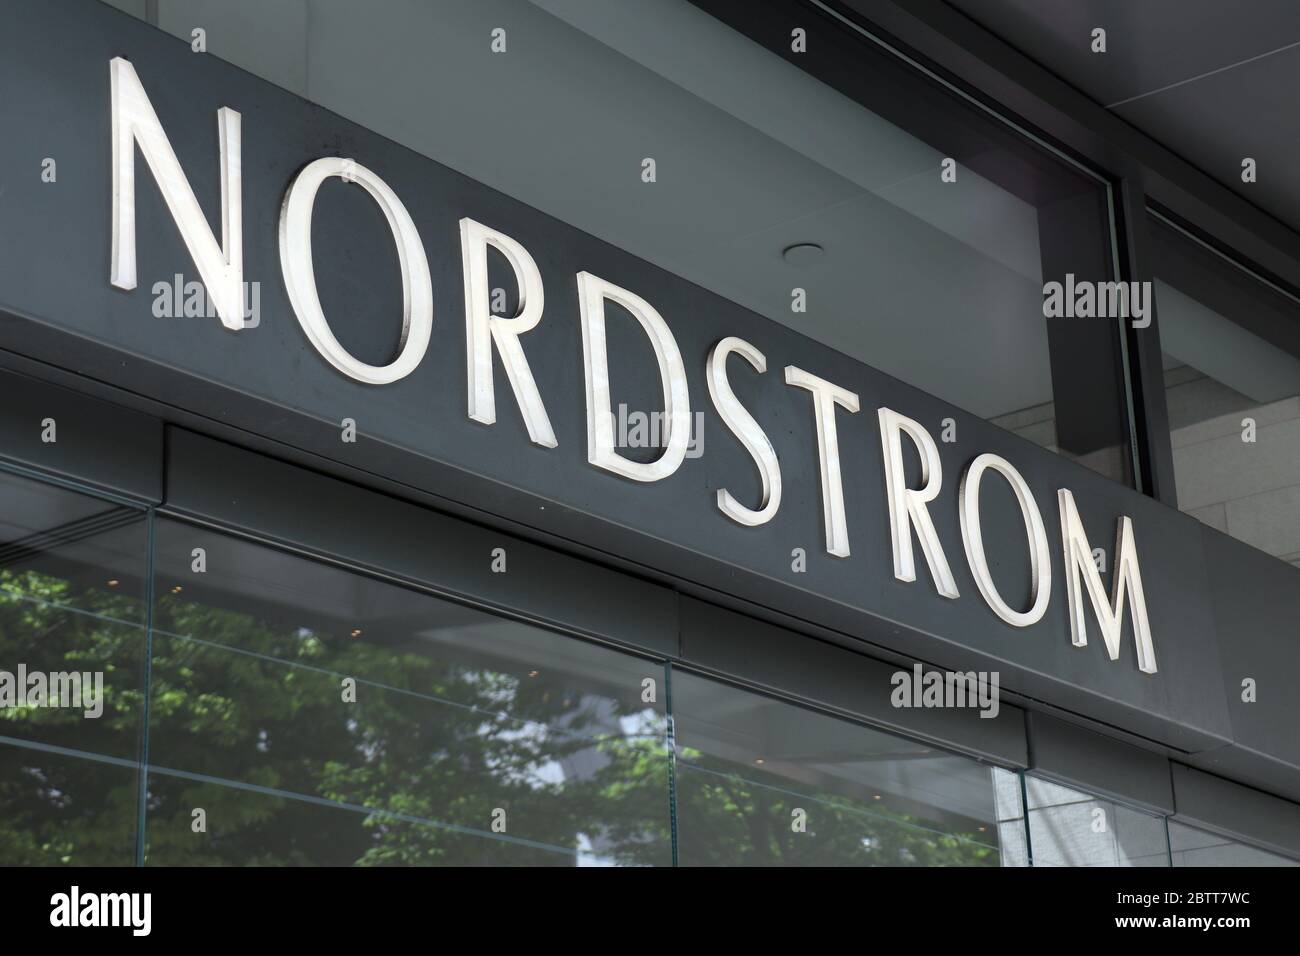 Have memories of Nordstrom flagship store in Seattle? Share your